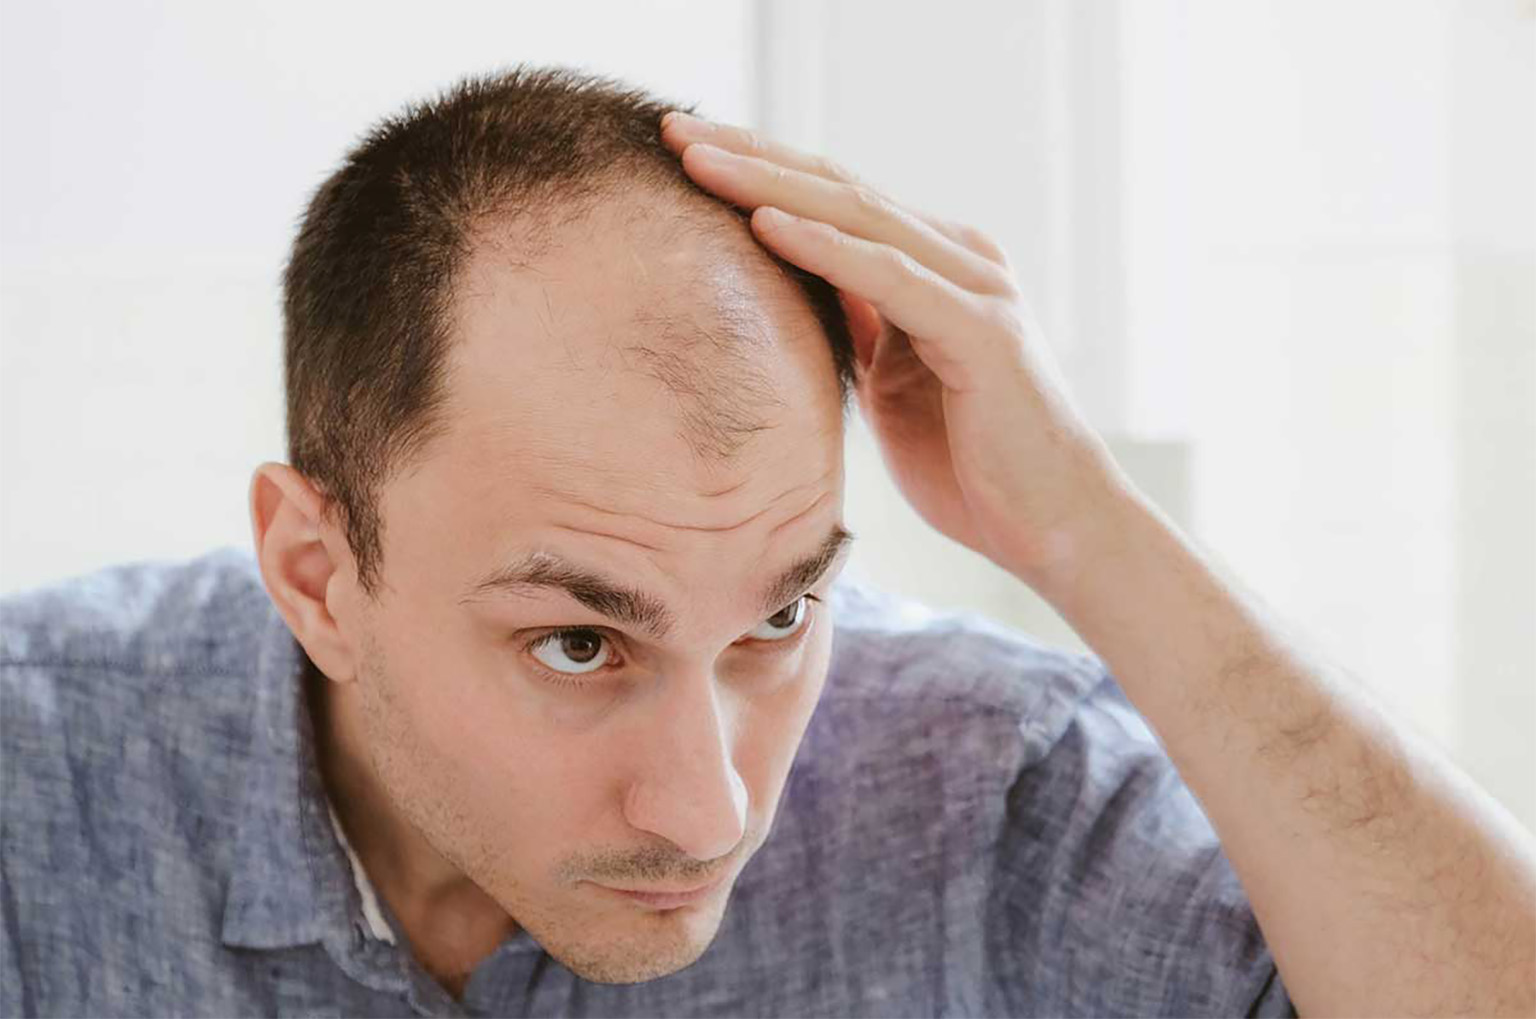 Suffering from Male Pattern Baldness? These Treatments Can Help